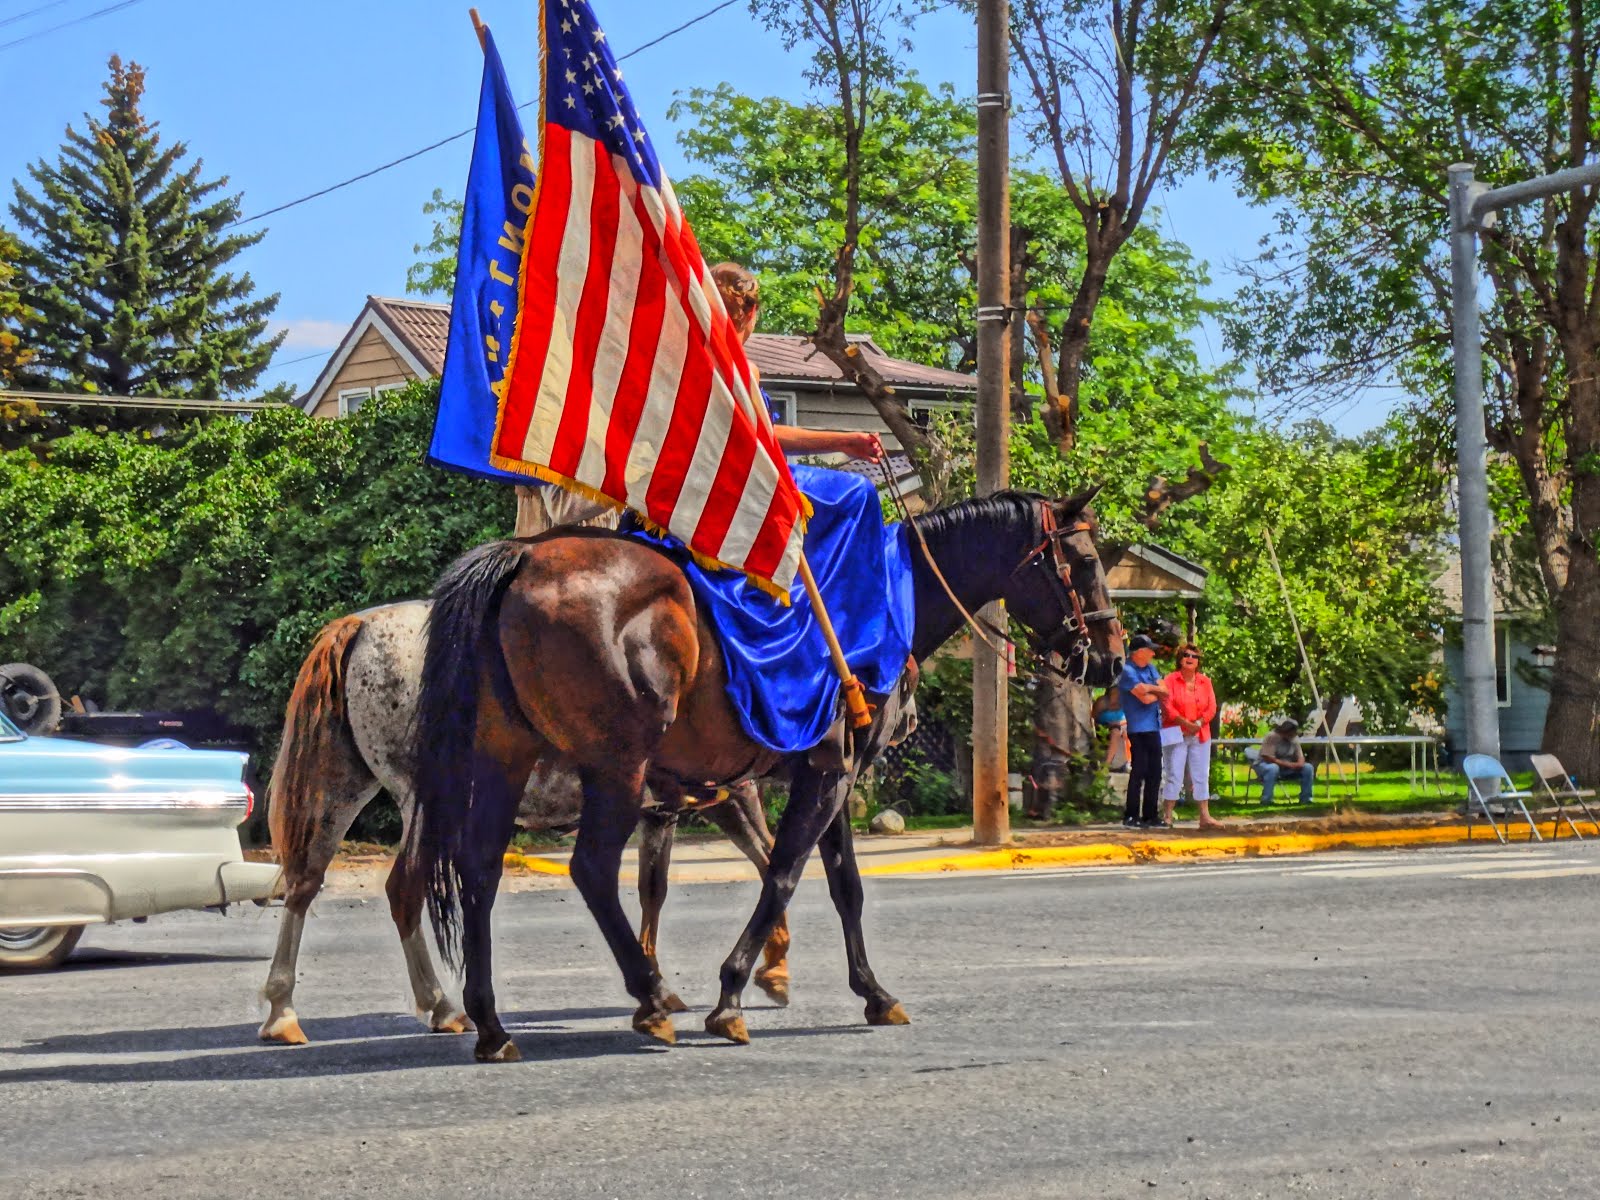 Flags in Montana Parade